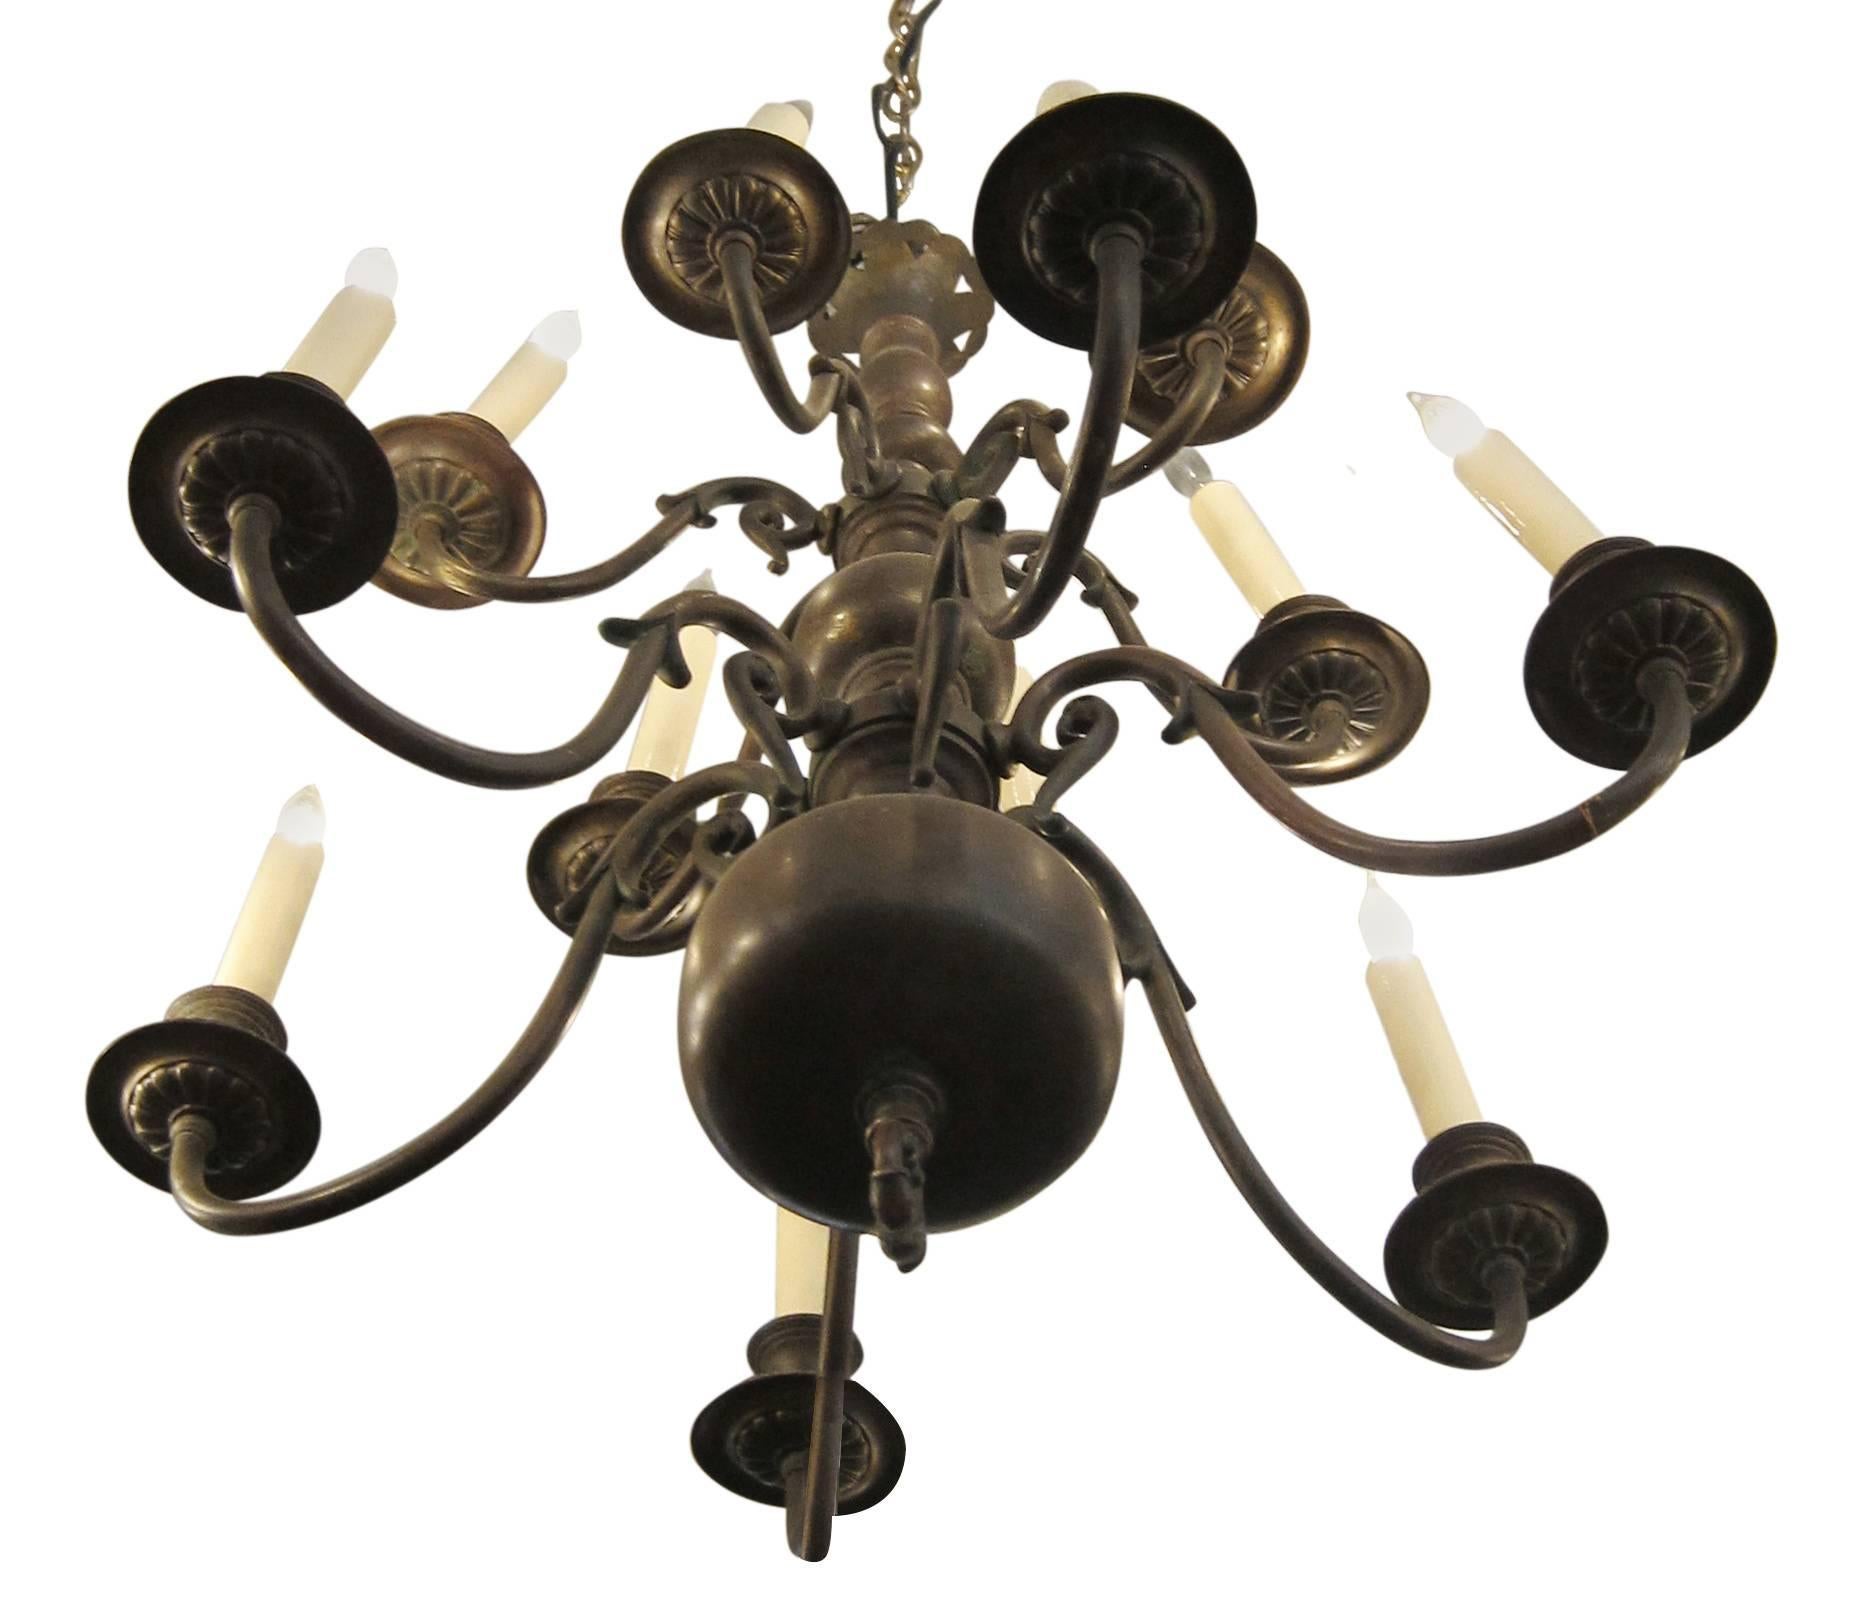 Oil rubbed bronze Dutch Colonial style chandelier with 12 lights. American made in the 1900s. Cleaned and rewired. Please note, this item is located in one of our NYC locations.